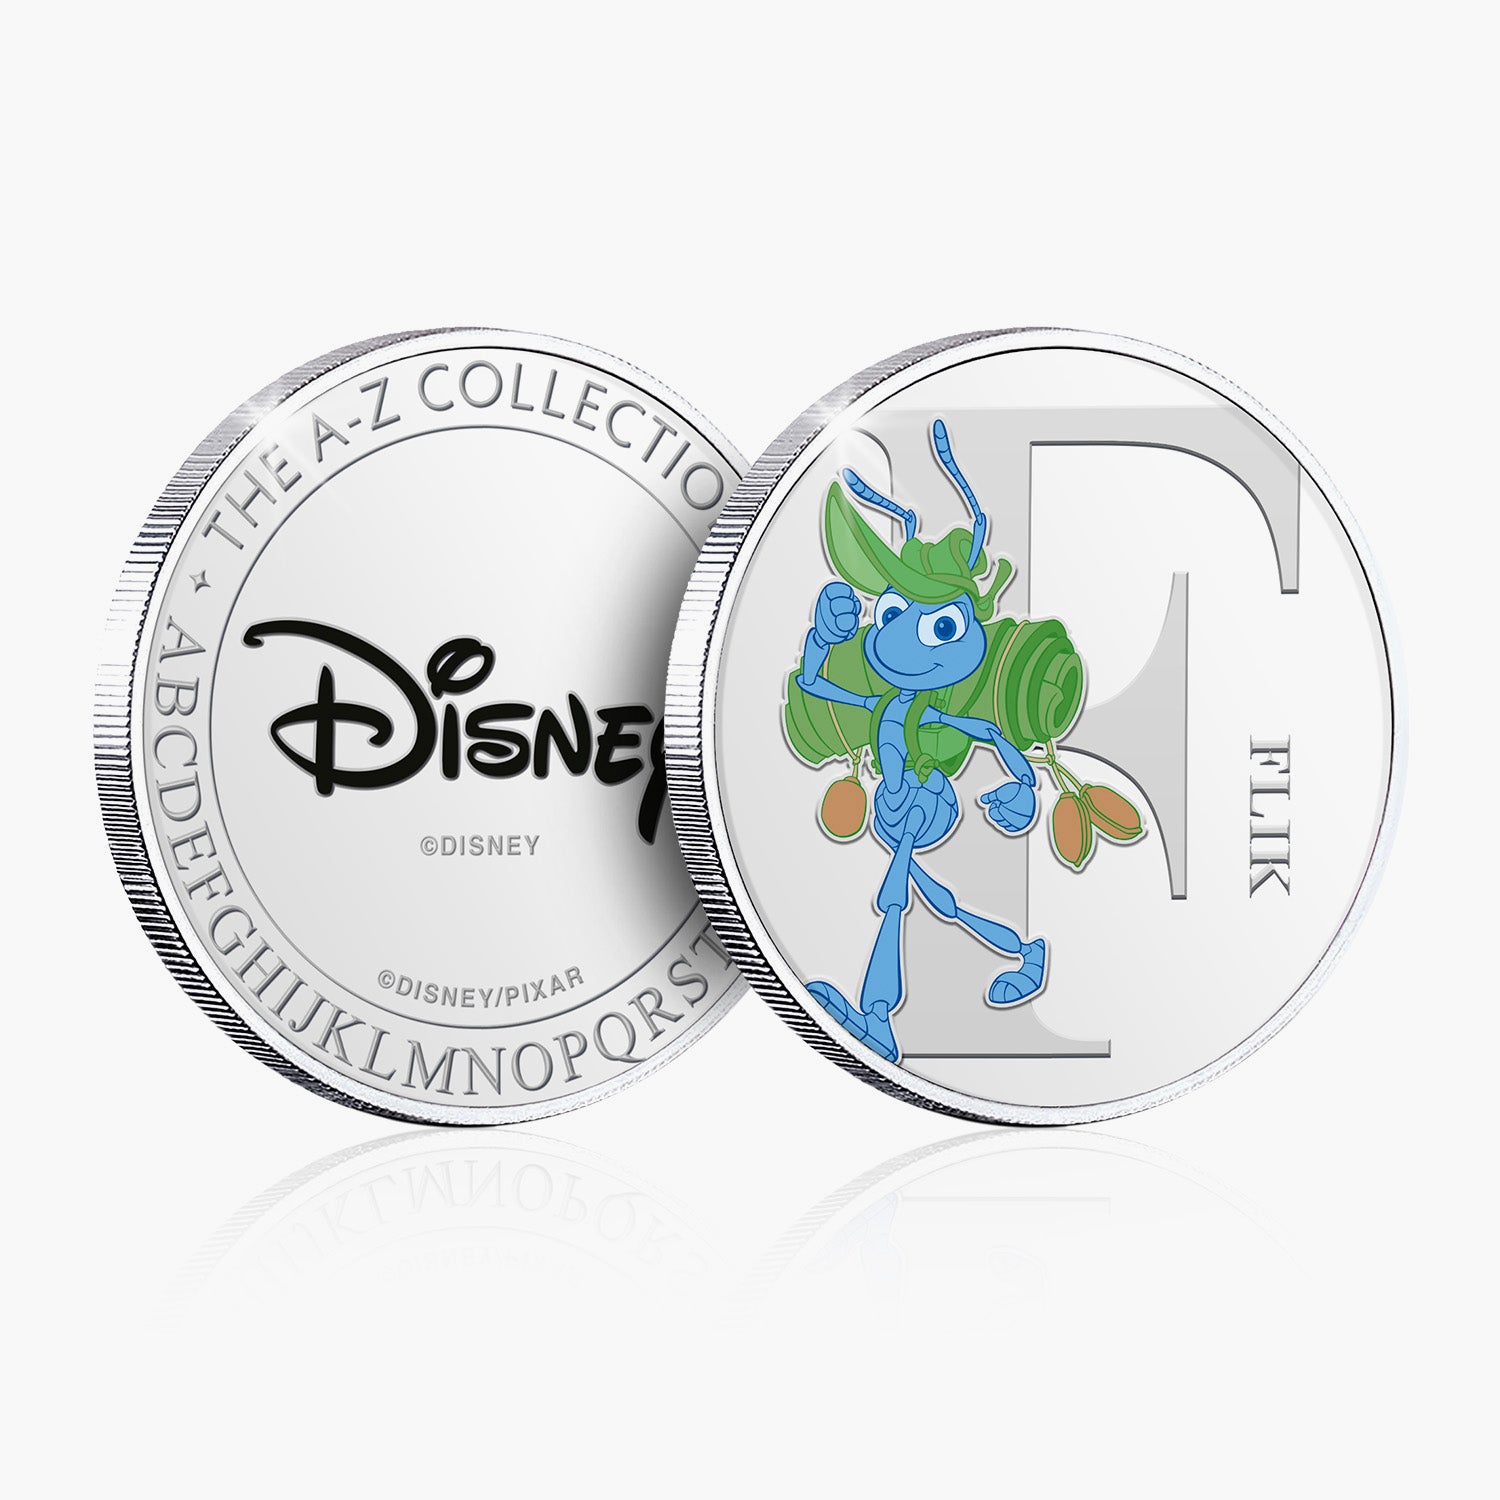 F is for Flik Silver-Plated Full Colour Commemorative